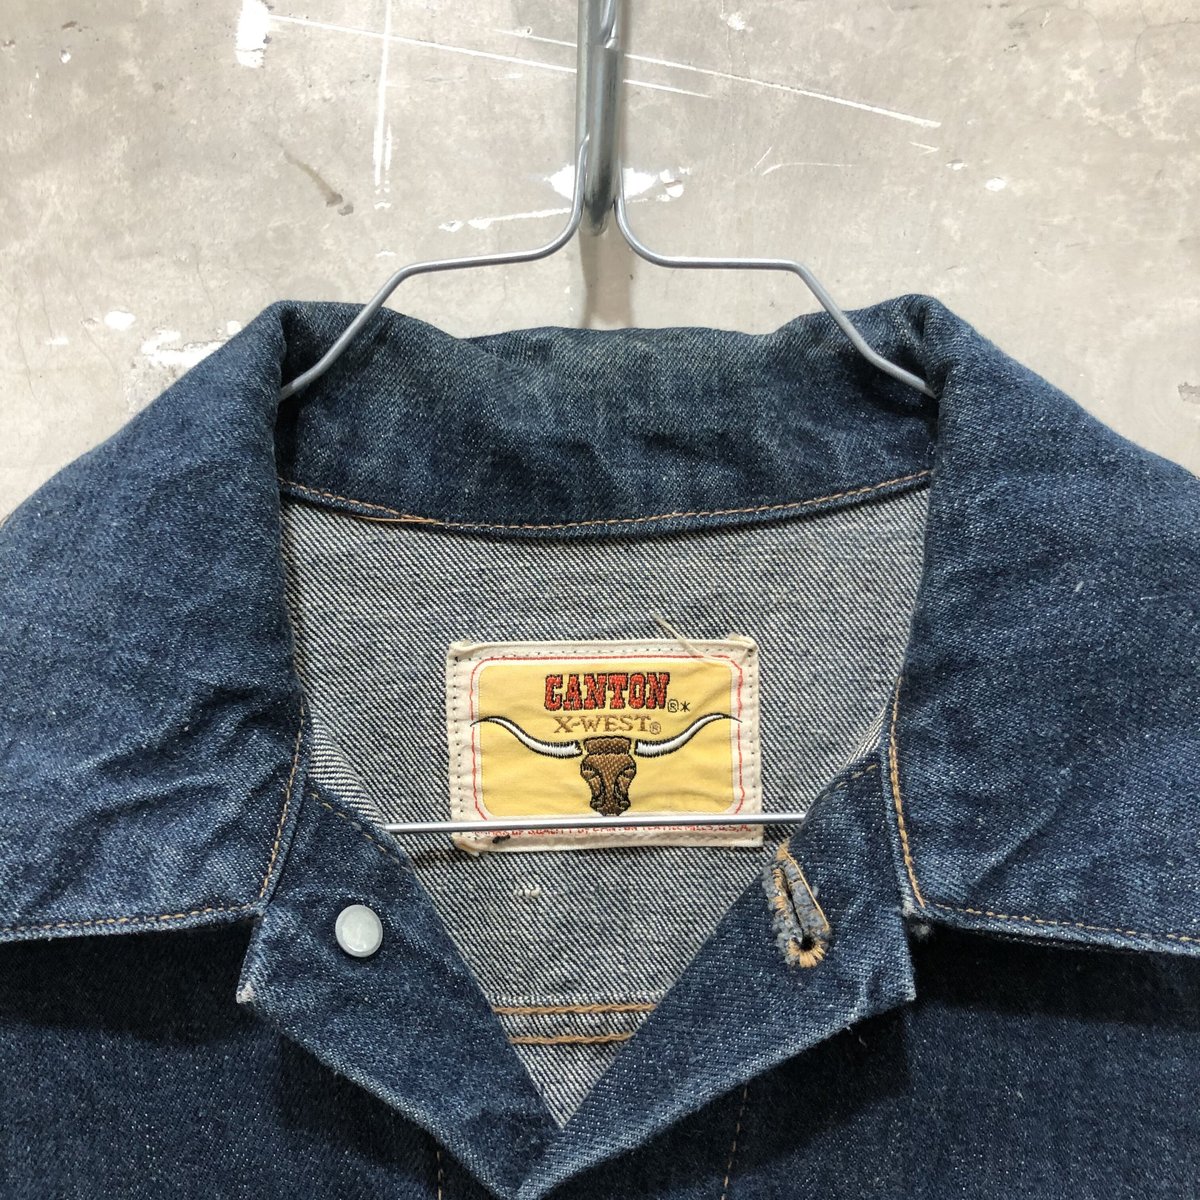 60s CANTON DENIM JKT | if you want